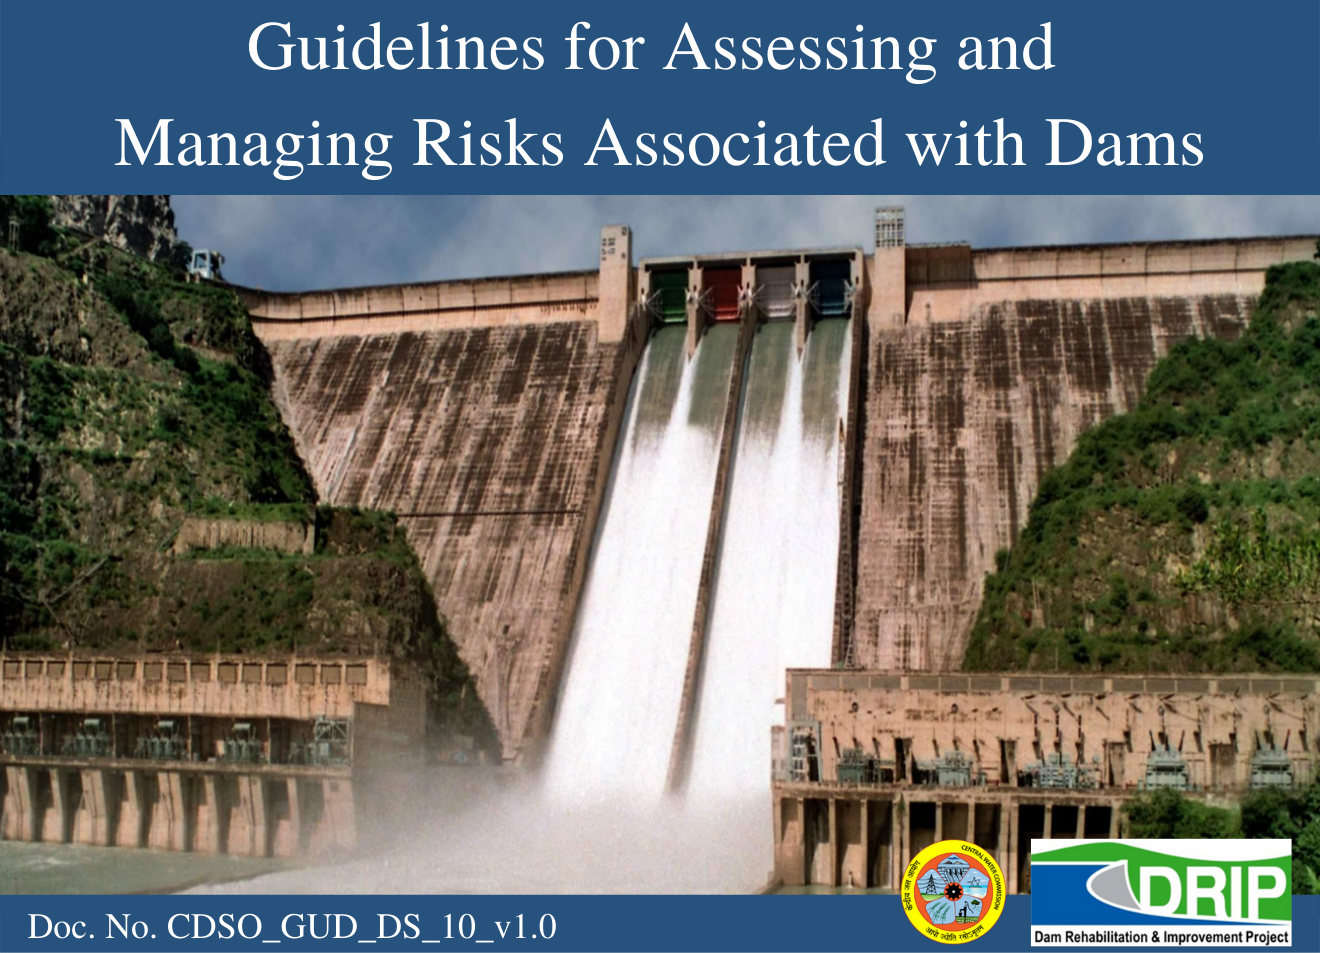 Guidelines-for-Assessing-and-Managing-Risks-Associated-with-Dams-Central-Water-Comission-CWC-DRIP-DAM-REHABILITATION-AND-IMPROVEMENT-PROJECT-IPRESAS